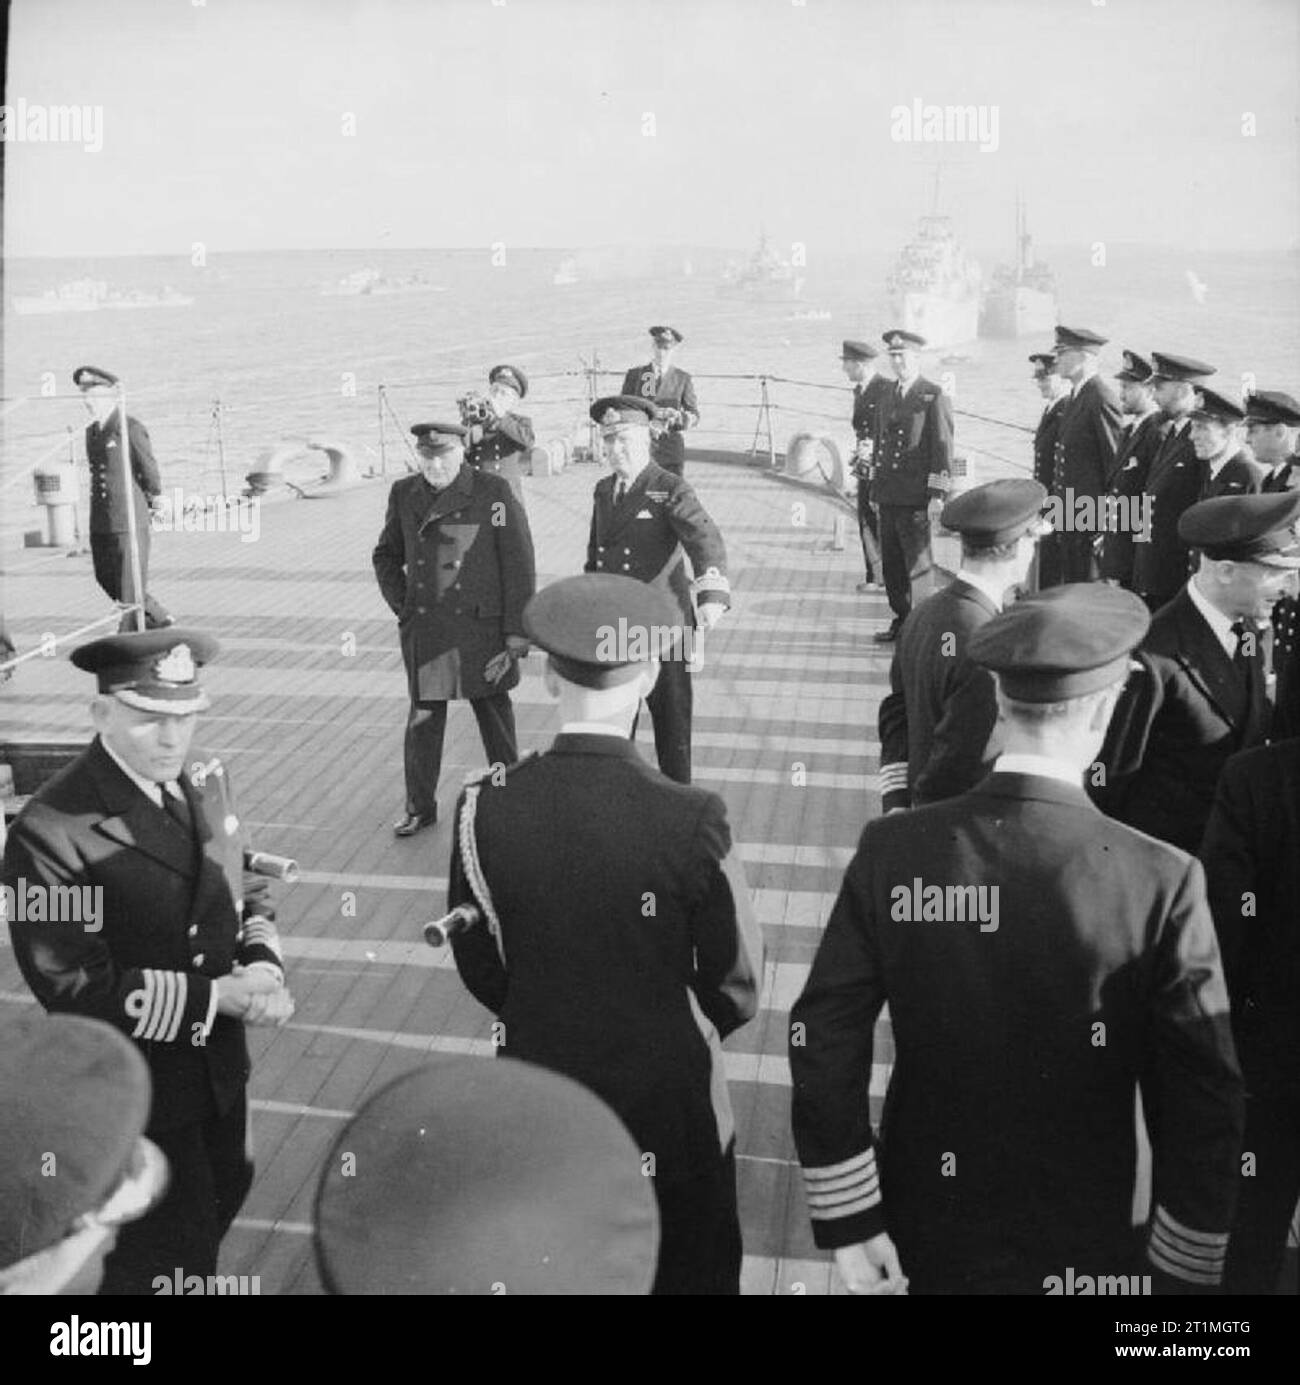 Winston Churchill Visiting the Home Fleet during the Second World War The Prime Minister, Mr Winston Churchill, aboard one of the Royal Navy warships that had just returned from Russia after escorting a convoy. With him is Rear Admiral R Burnett, who commanded the escorting ships. Note the Royal Navy cameraman immediately behind the Prime Minister. Stock Photo